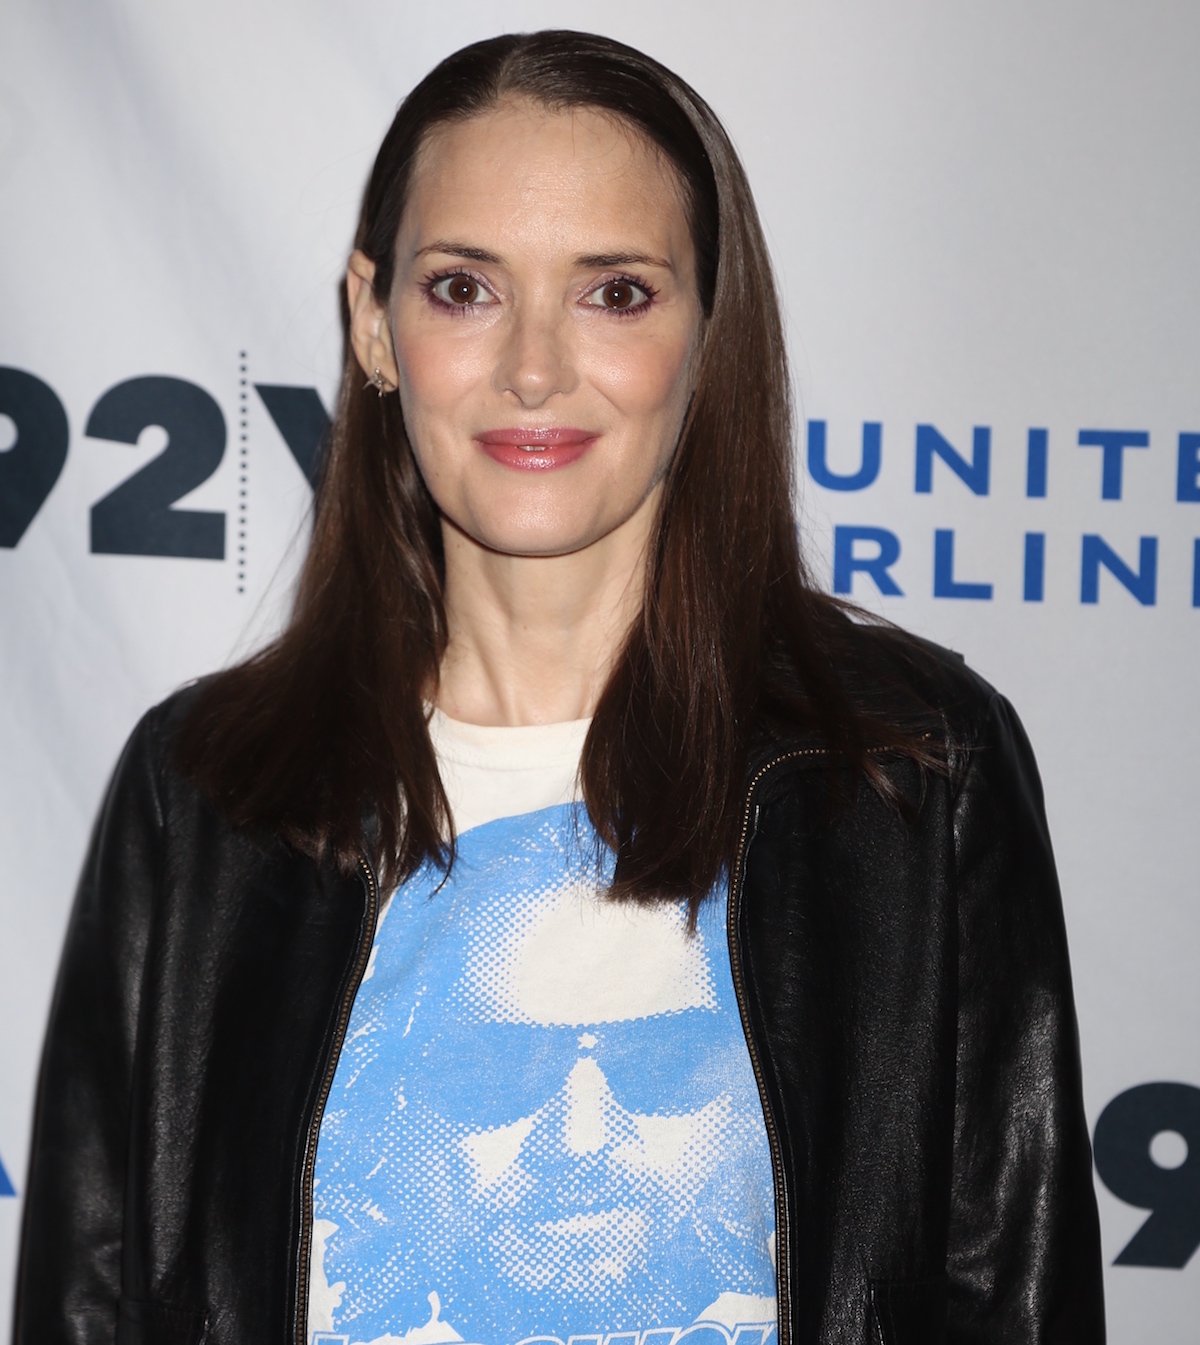 winona ryder's family history related to cults